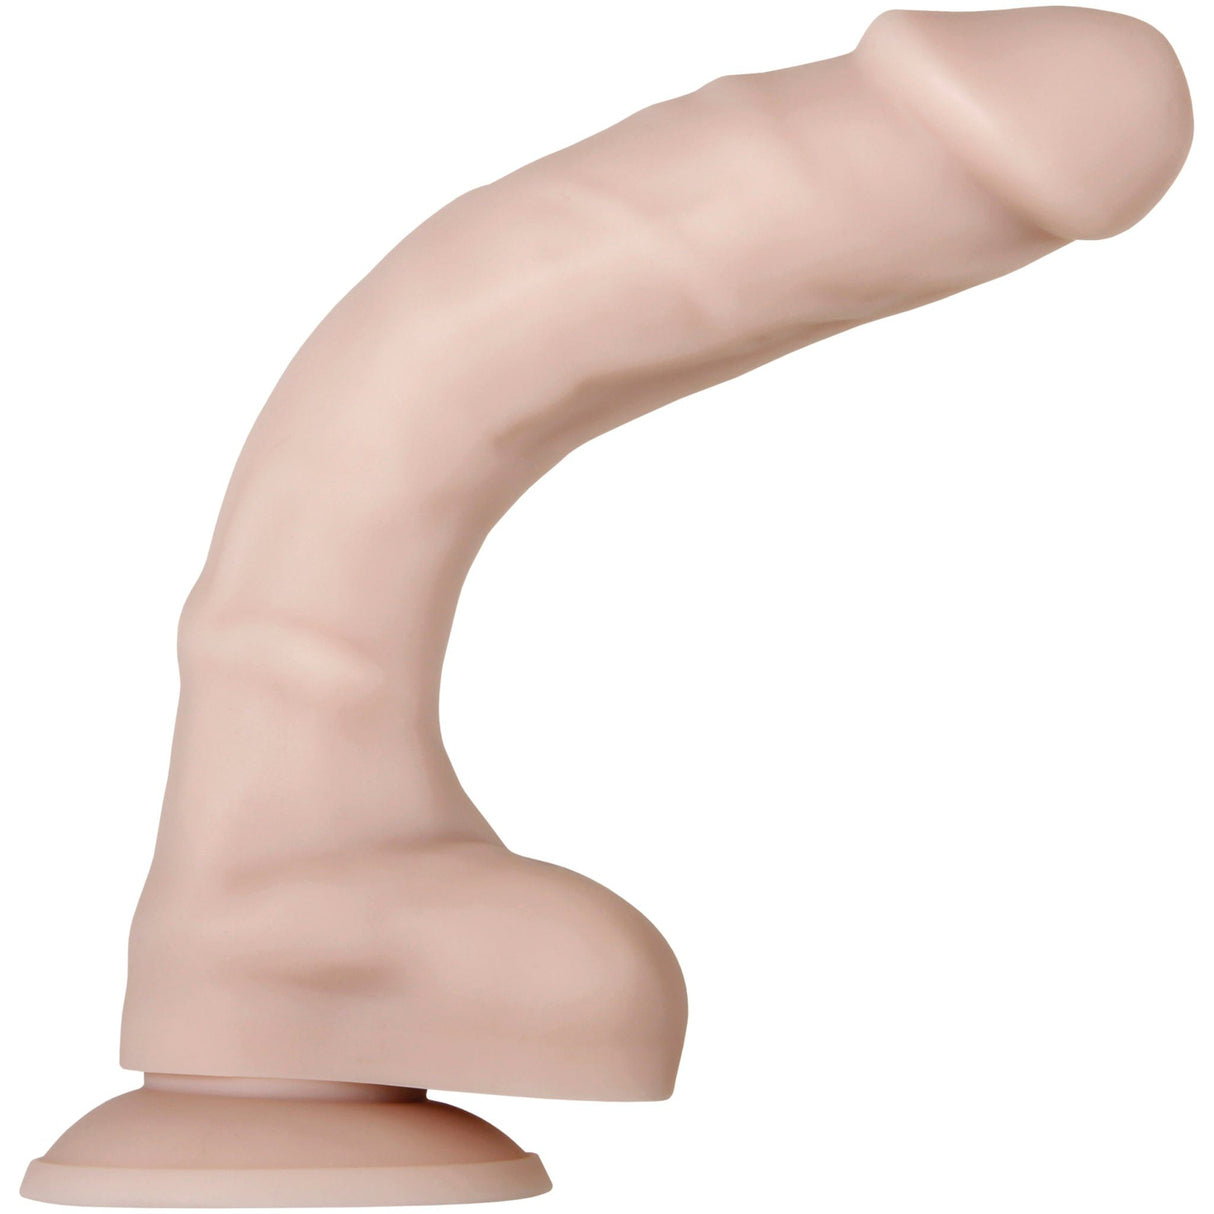 Evolved - Real Supple Silicone Posable Realistic Dildo CherryAffairs